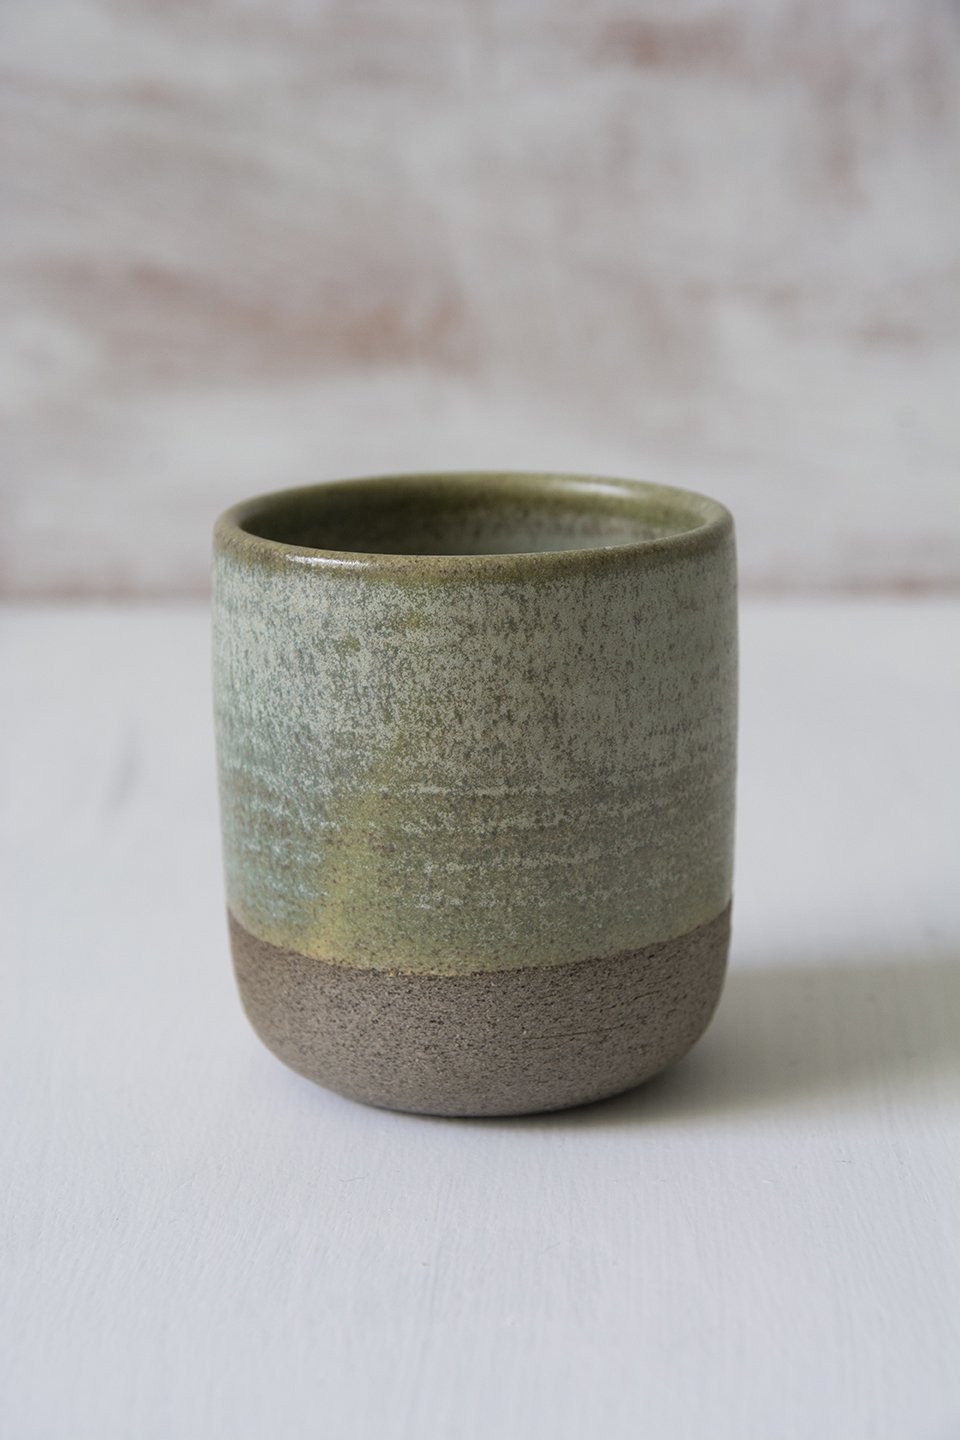 Ceramic Espresso Cups - Mad About Pottery - Mugs and Cups